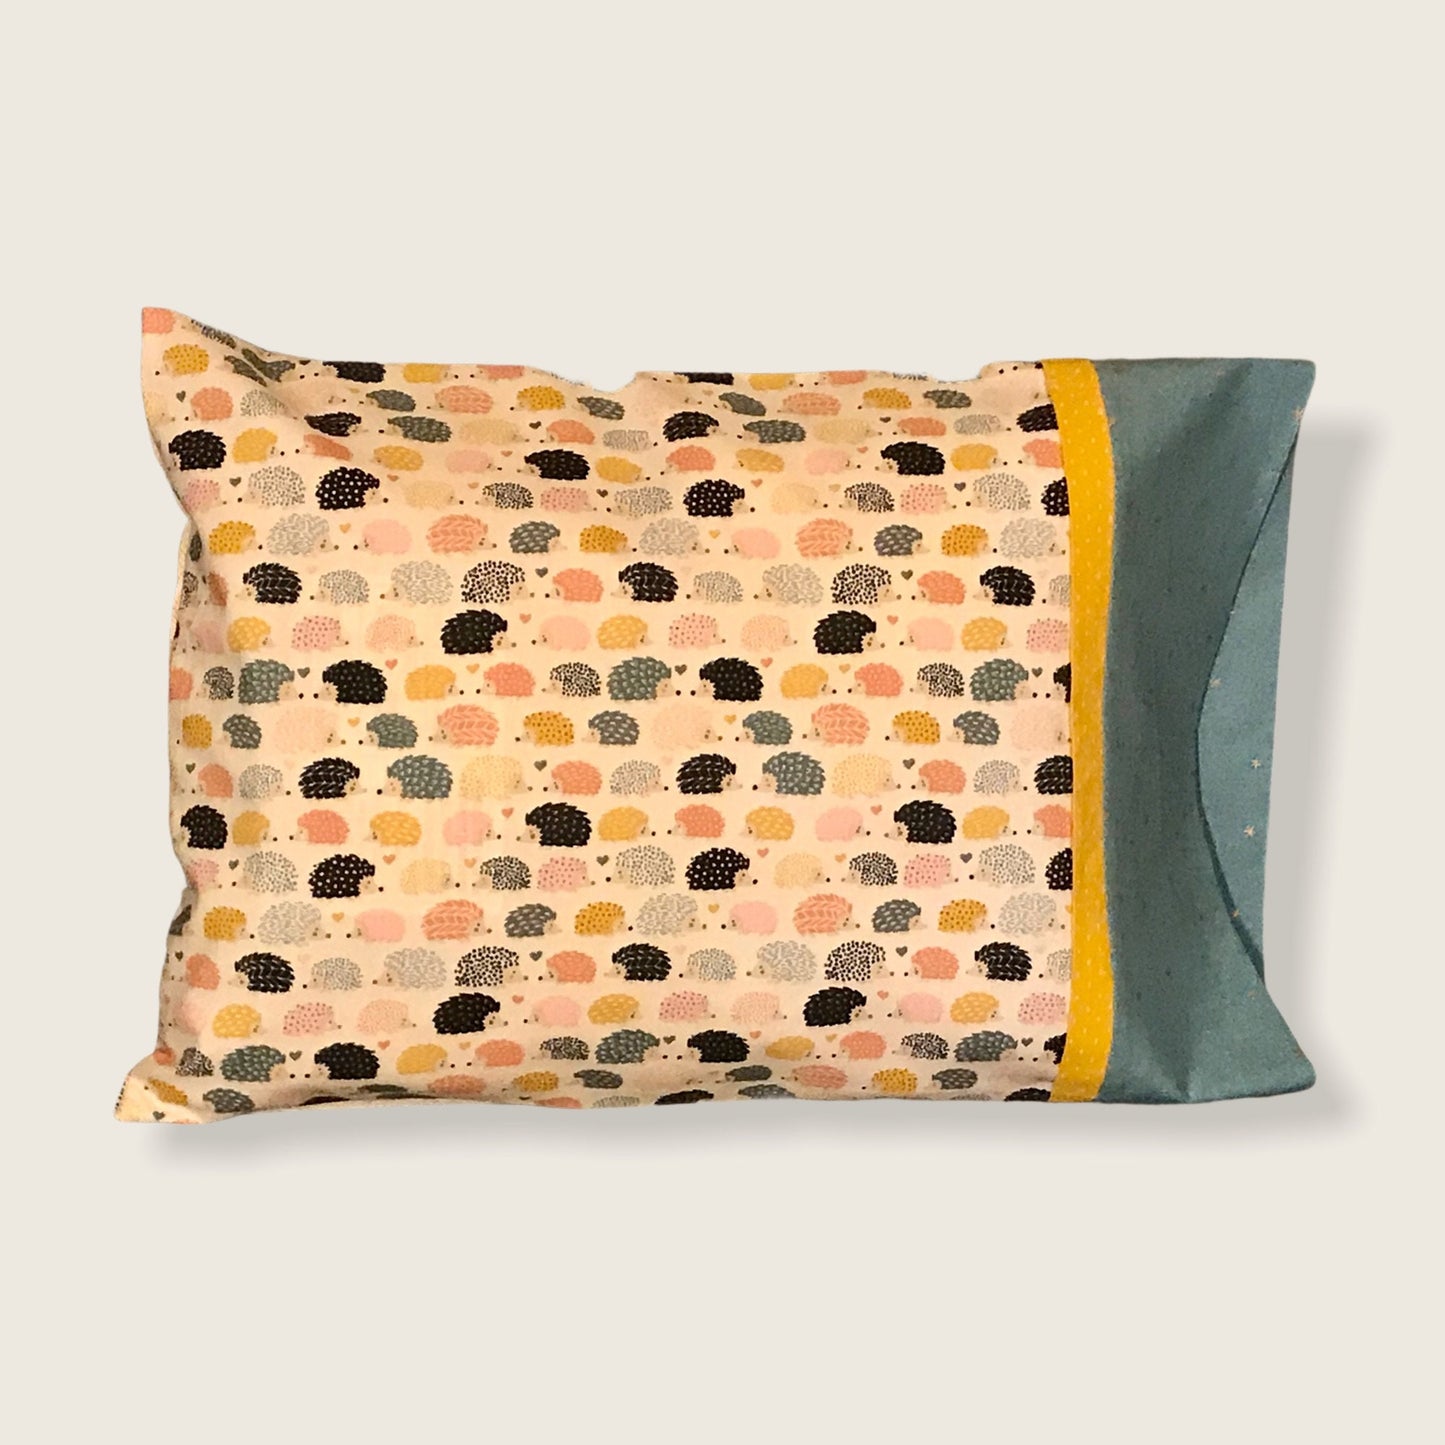 Washable hedgehog pillow case featuring a sweet hedgehog and heart pattern! These little guys are adorable!!